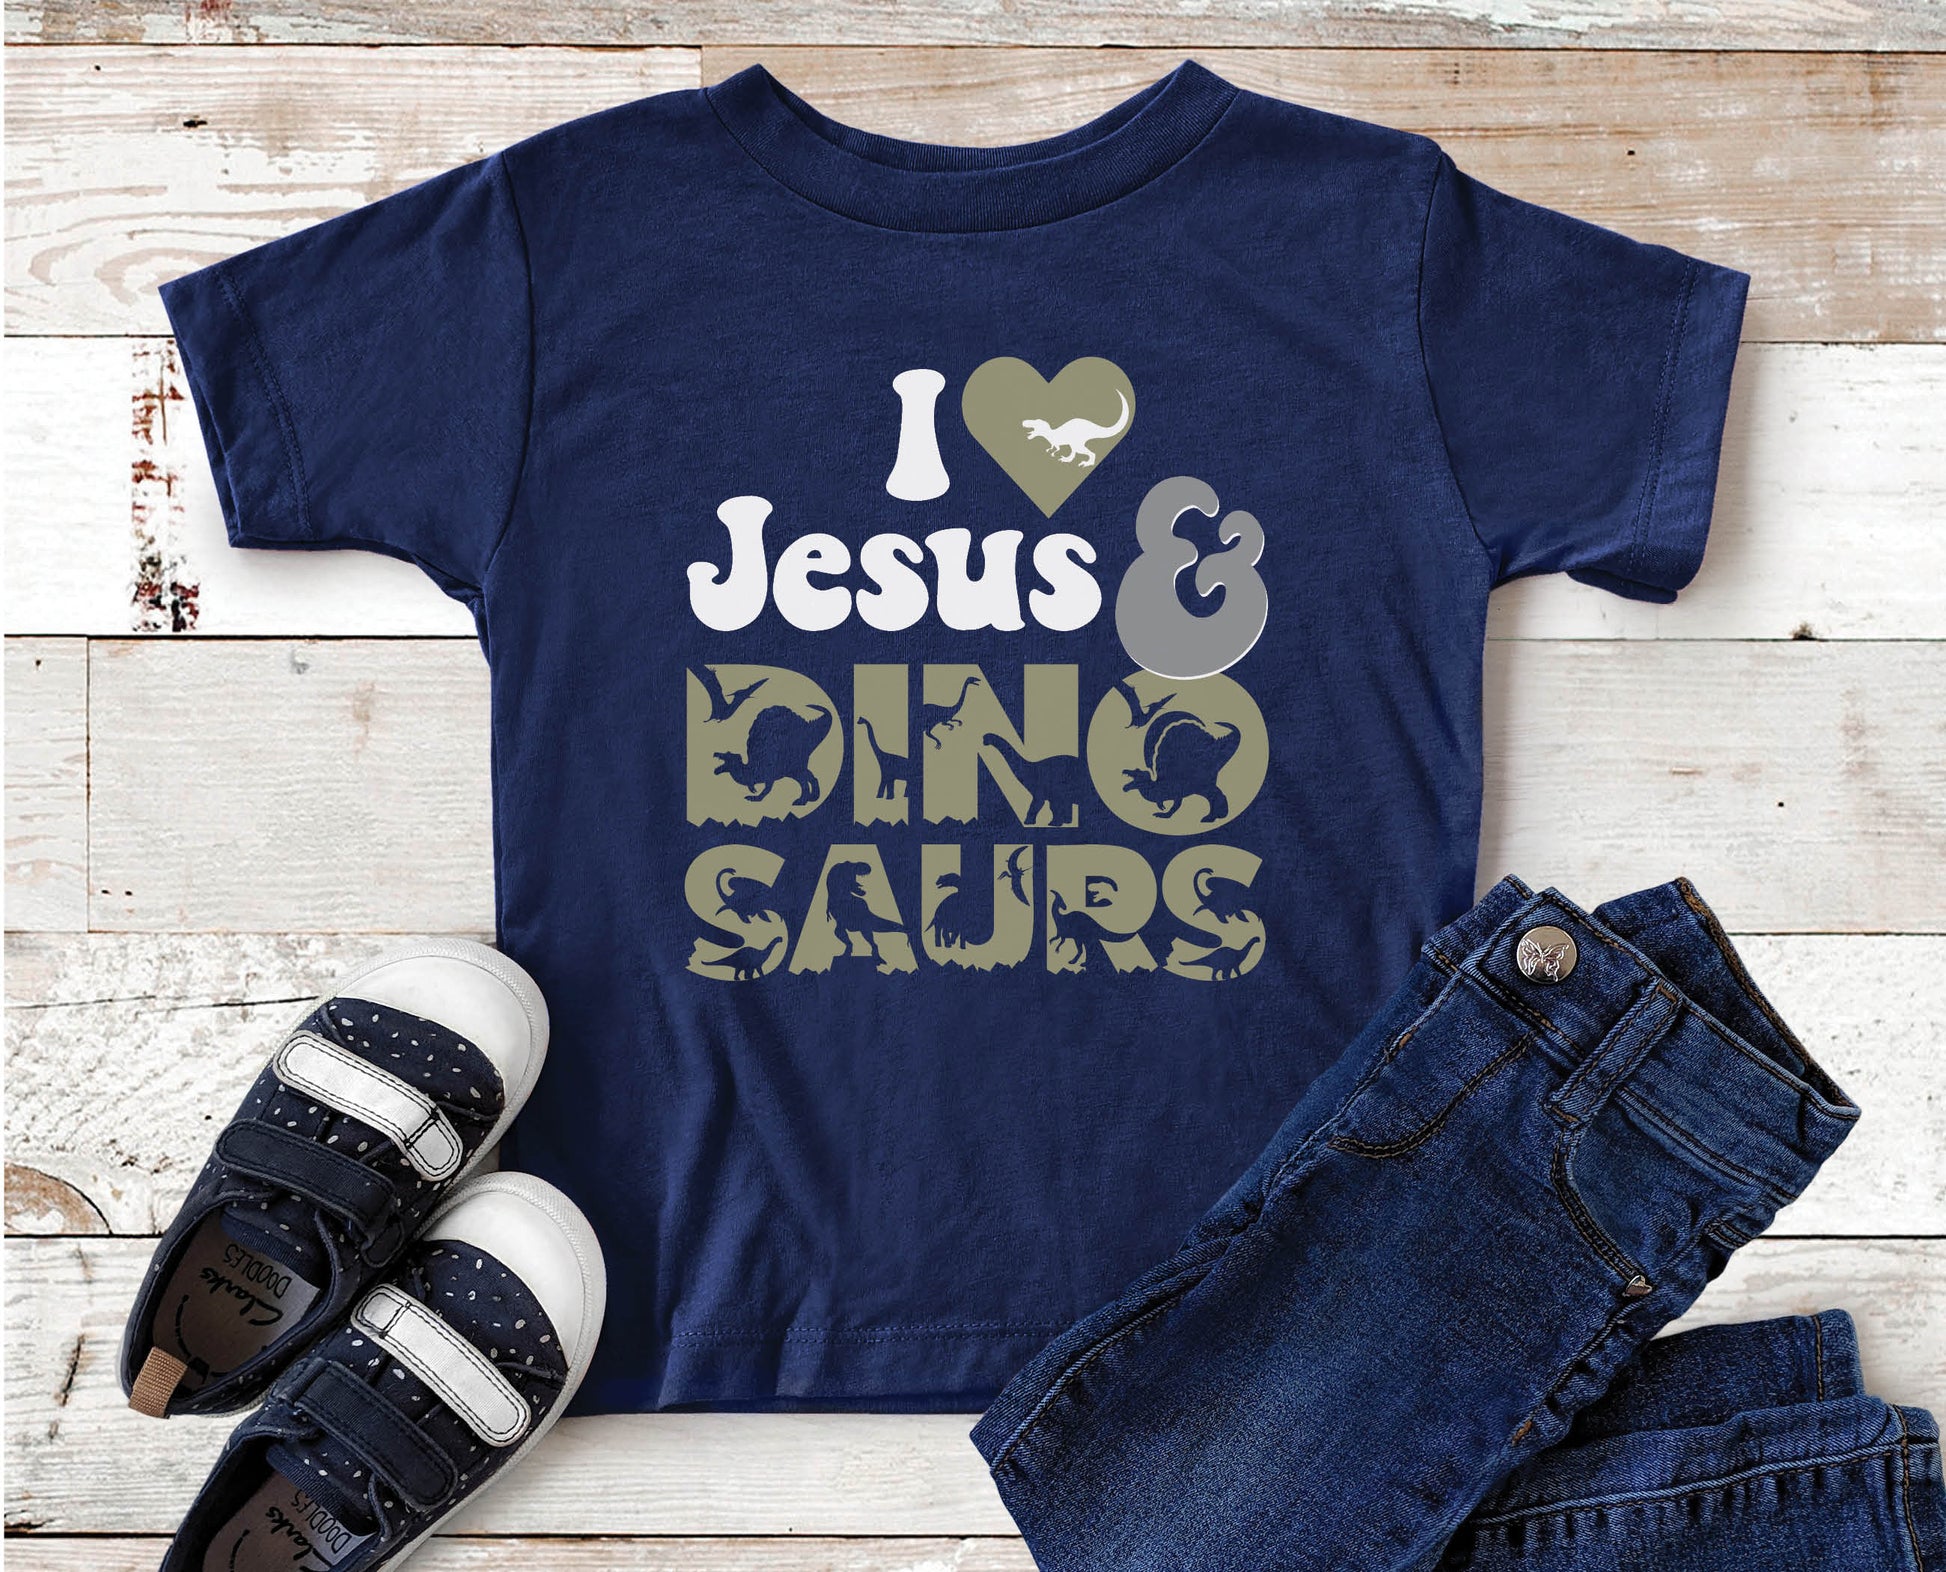 I Love Jesus and Dinosaurs cute Christian aesthetic soft toddler size kids t-shirt for boys in white, black, heather gray, and navy blue